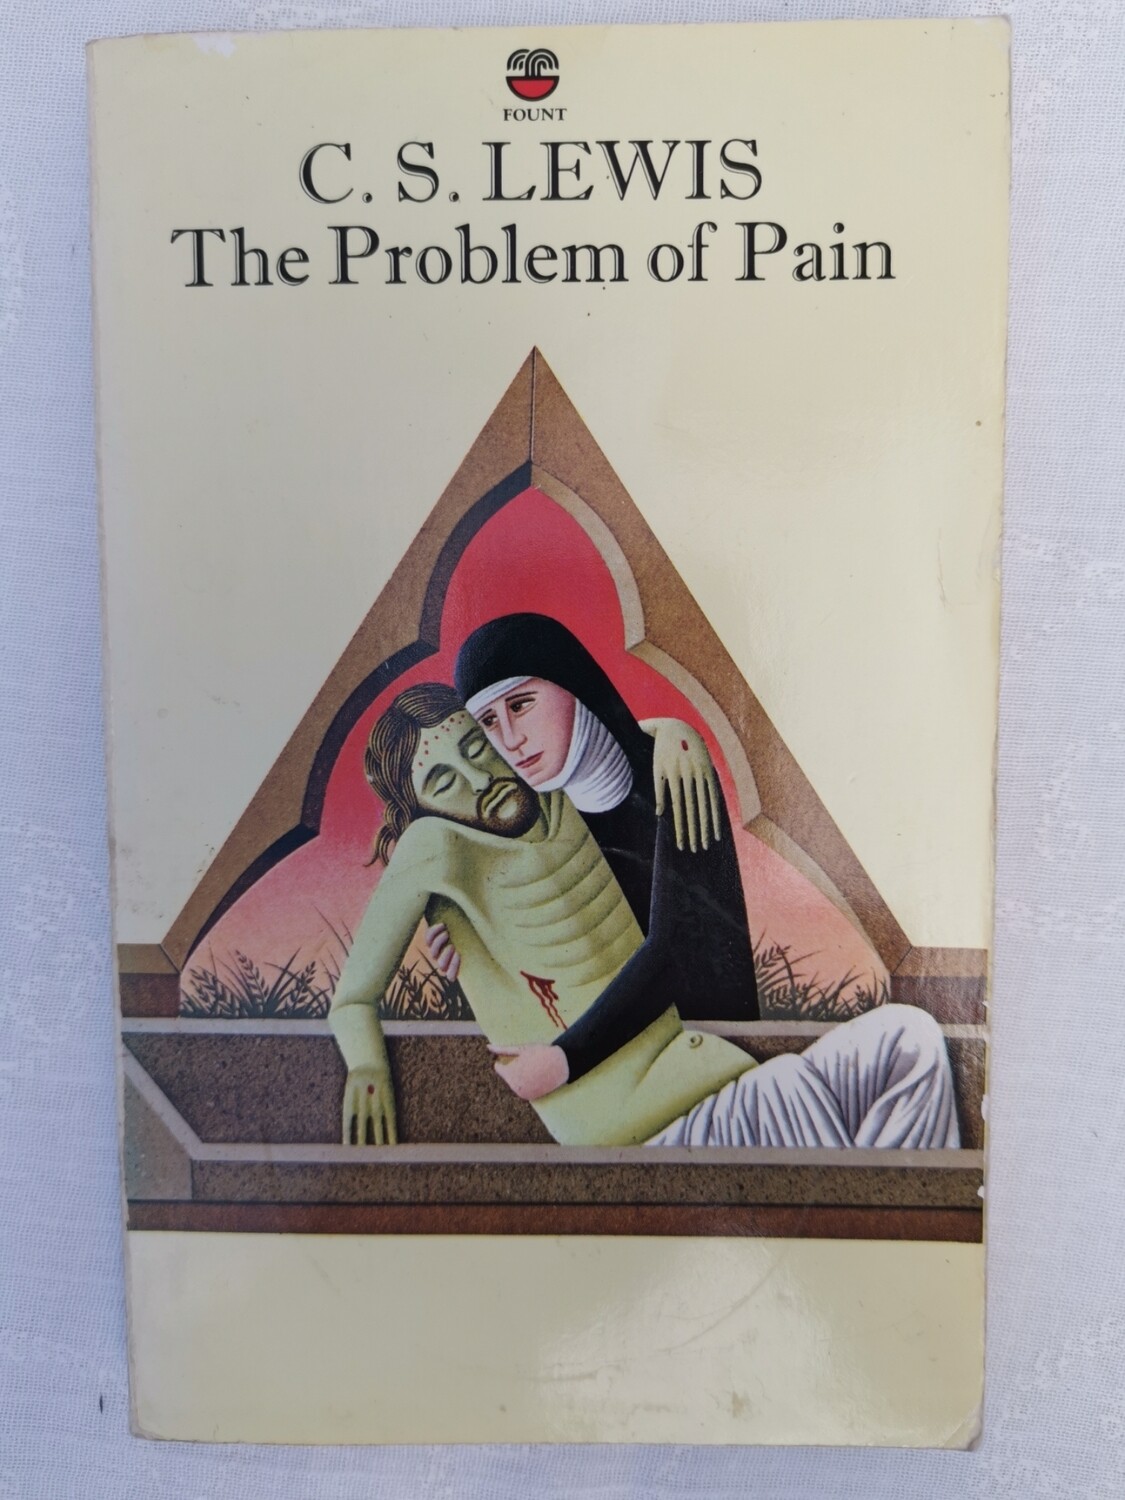 The problem of pain, C. S. Lewis